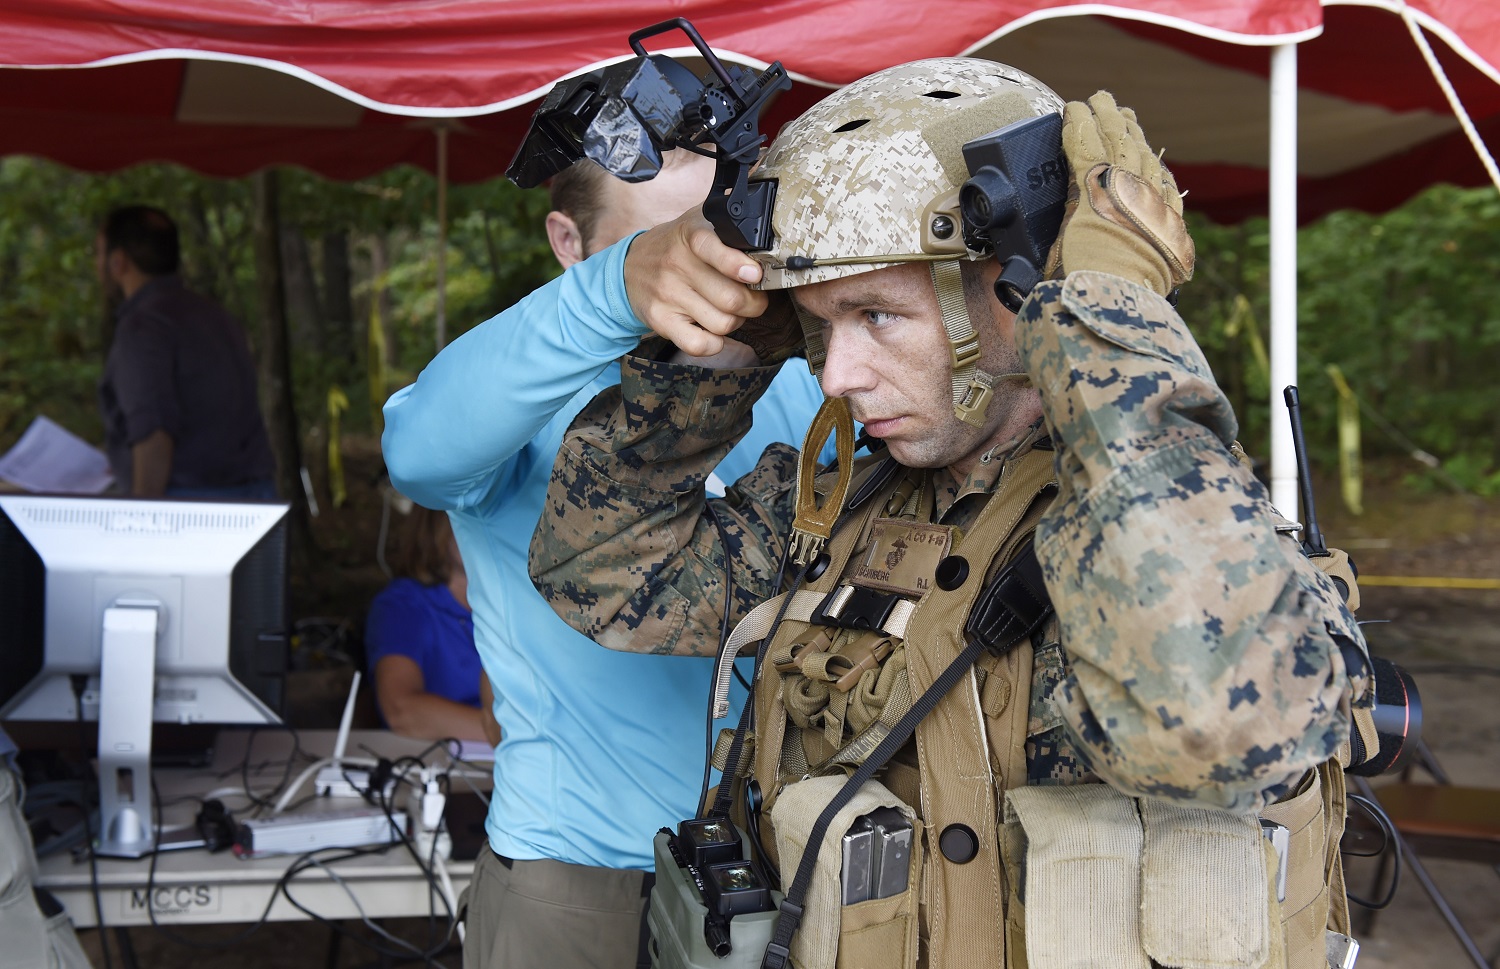 A Marine is fitted with the Augmented Immersive Team Trainer (AITT) from the Office of Naval Research (ONR) during on-going testing at Quantico, Va. The AITT allows Marines to transform any location into a dynamic training ground by injecting virtual images, indirect fire effects, aircraft, vehicles, simulated people, etc. onto a real-world view of one's surroundings. U.S. Navy photo by John F. Williams 